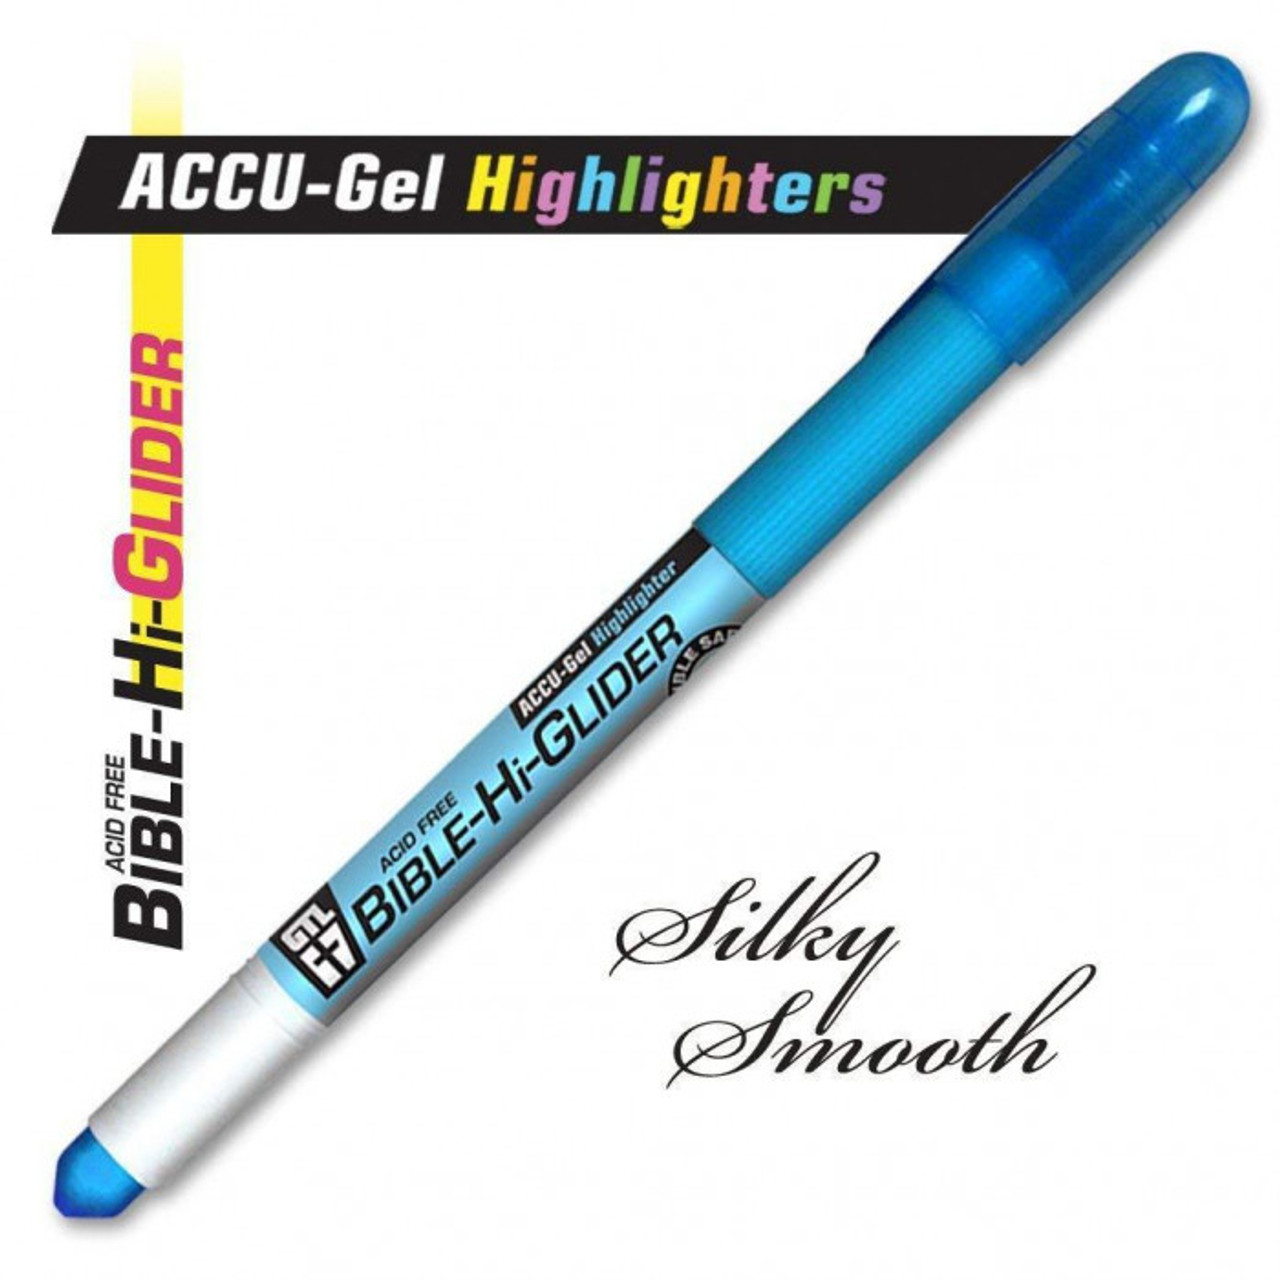 WhiteBible Gel Highlighters - Study Notes ABA